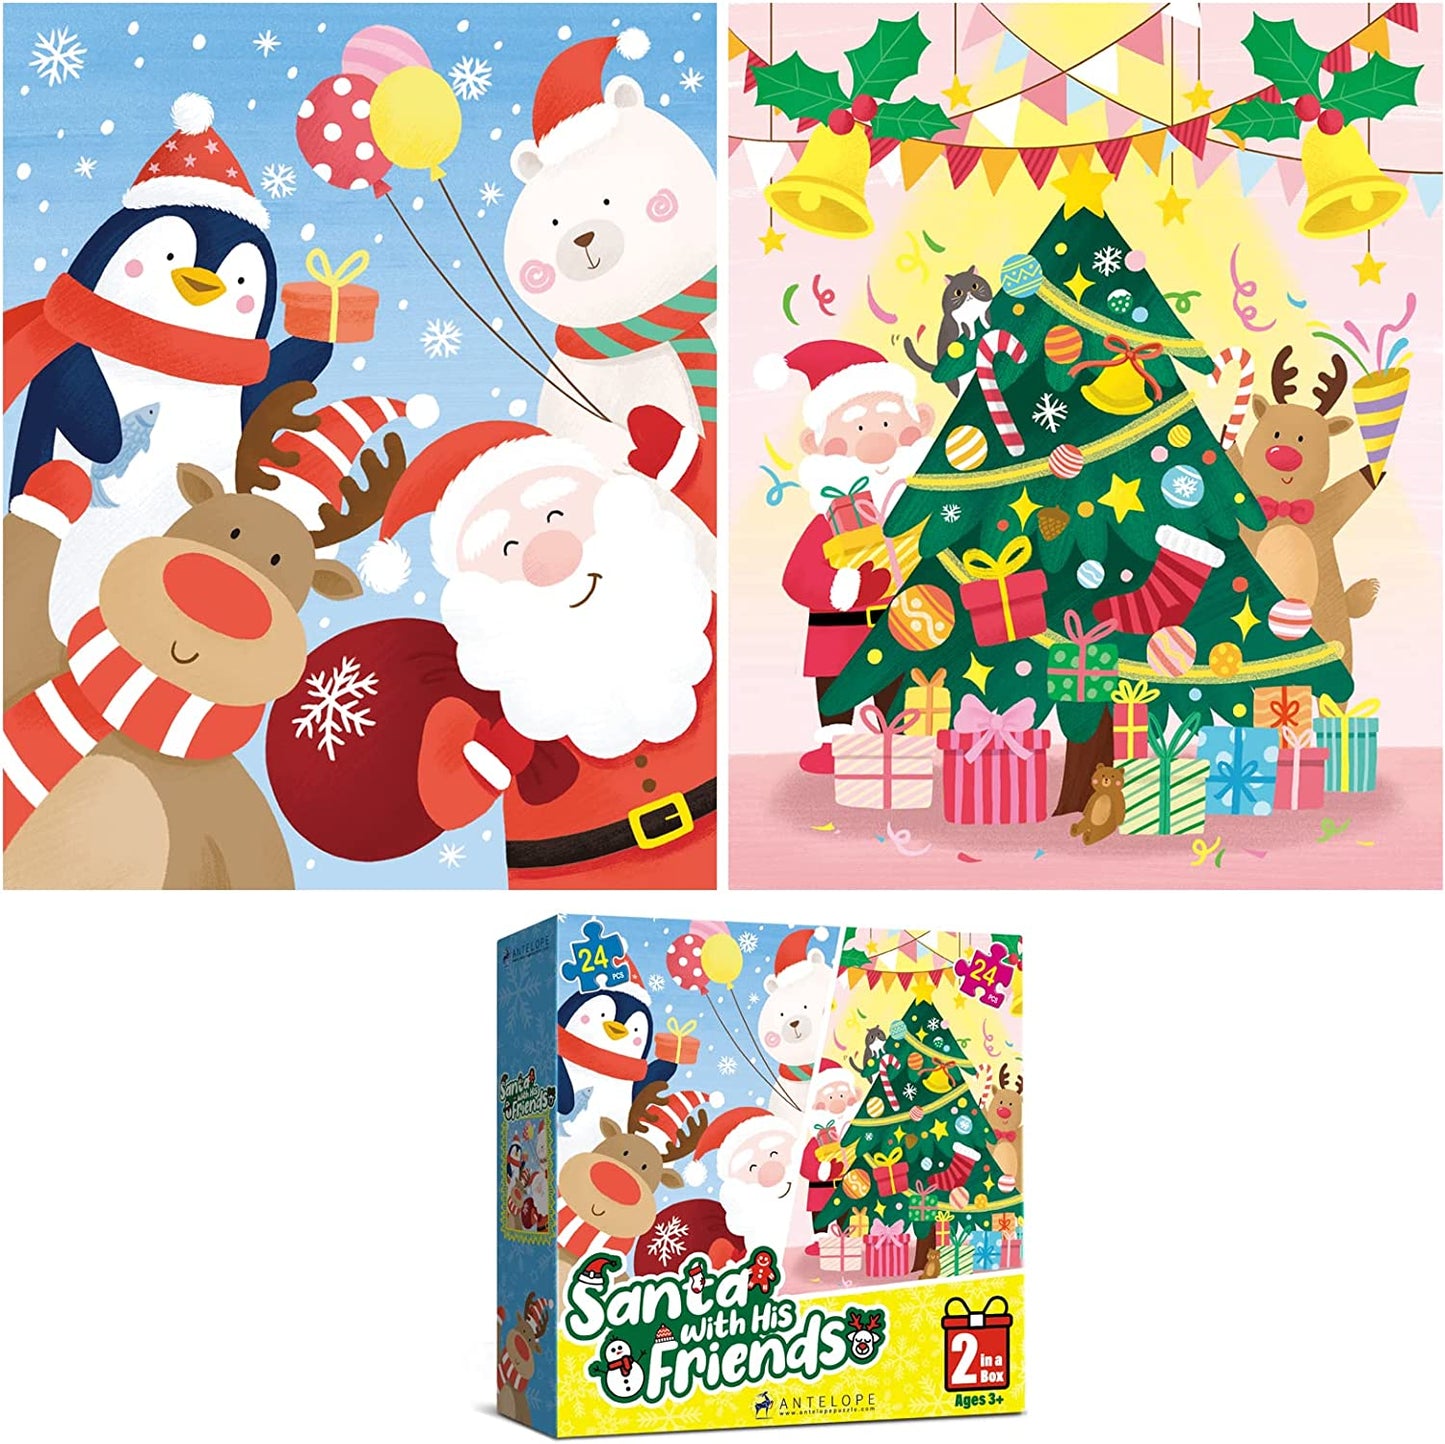 2 in 1-24 Piece Jigsaw Puzzle for Kids Age 3 and up, Santa with His Freinds Jigsaw Puzzles, 24 Large Pieces Puzzle, 11.7" x 8.3", 2-Pack of Christmas Puzzles